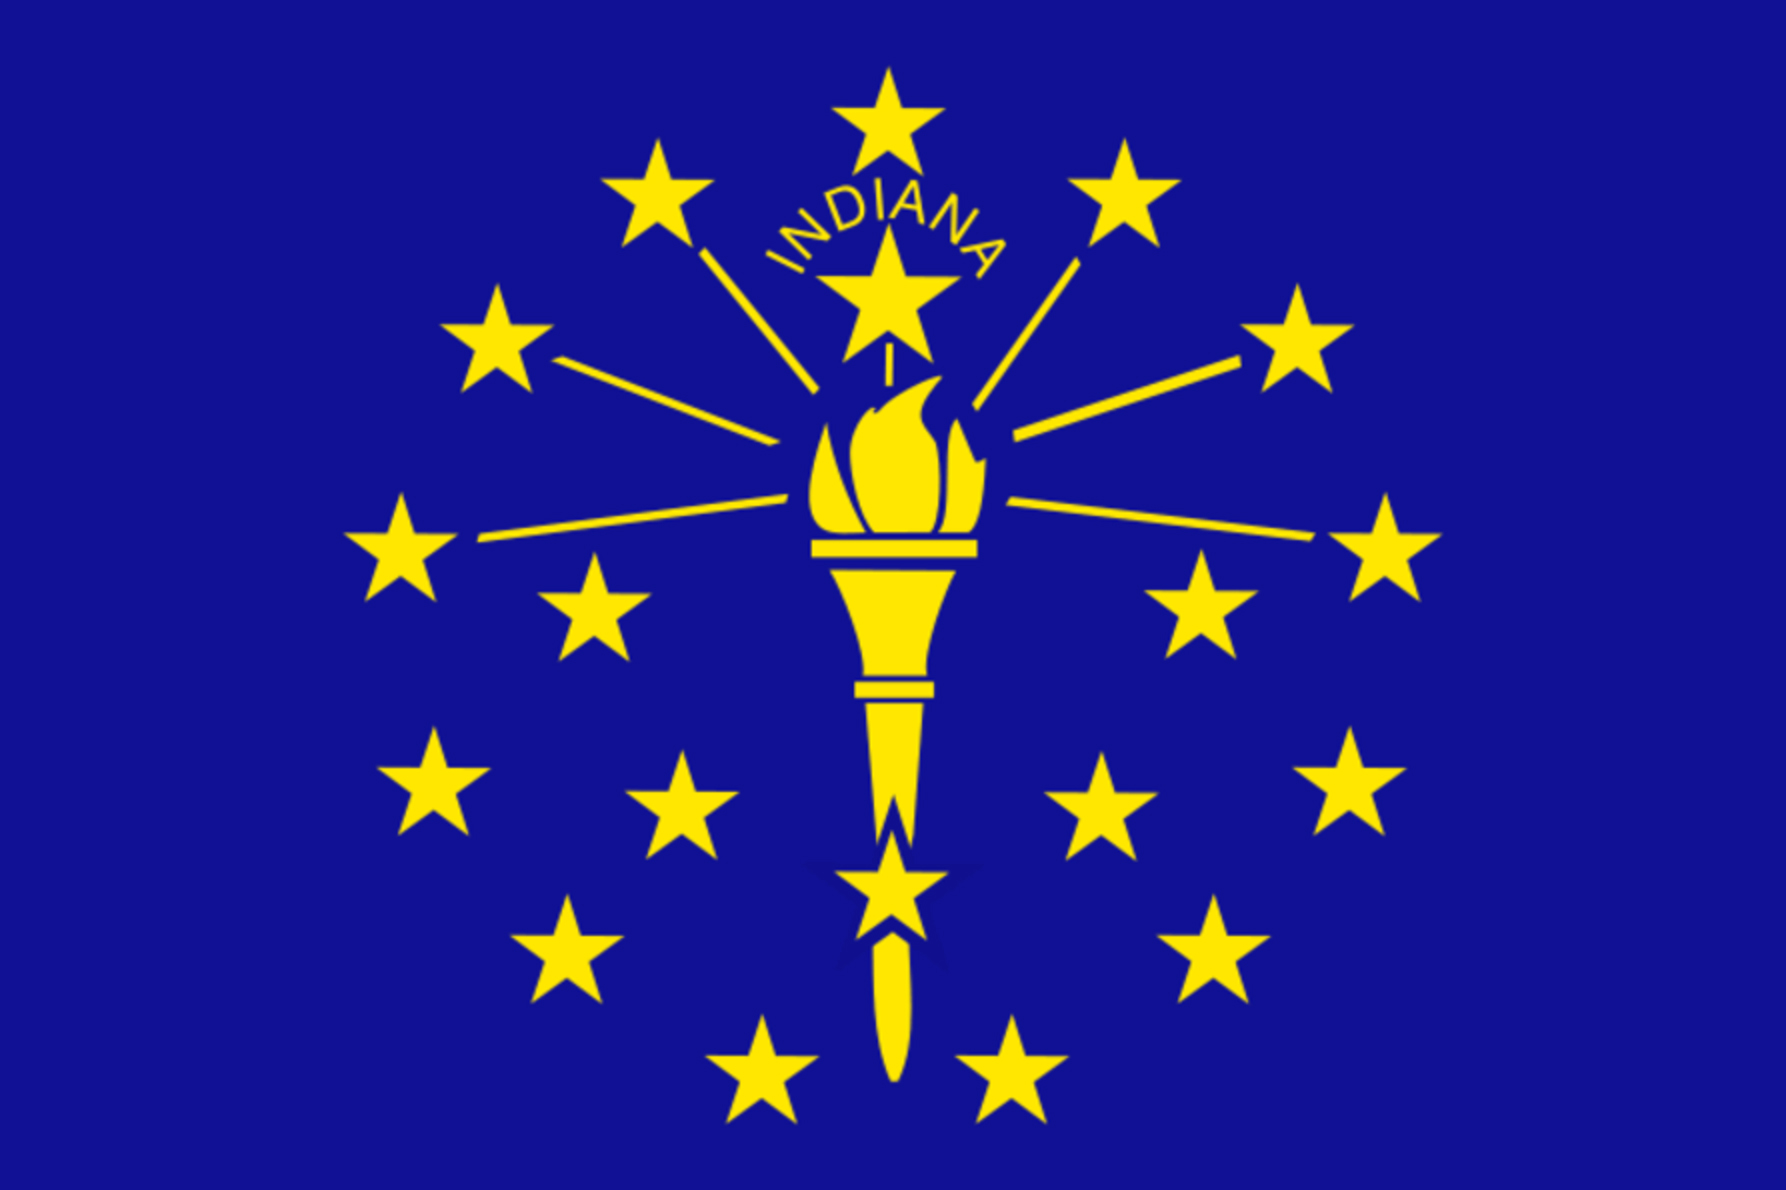 Indiana State flag